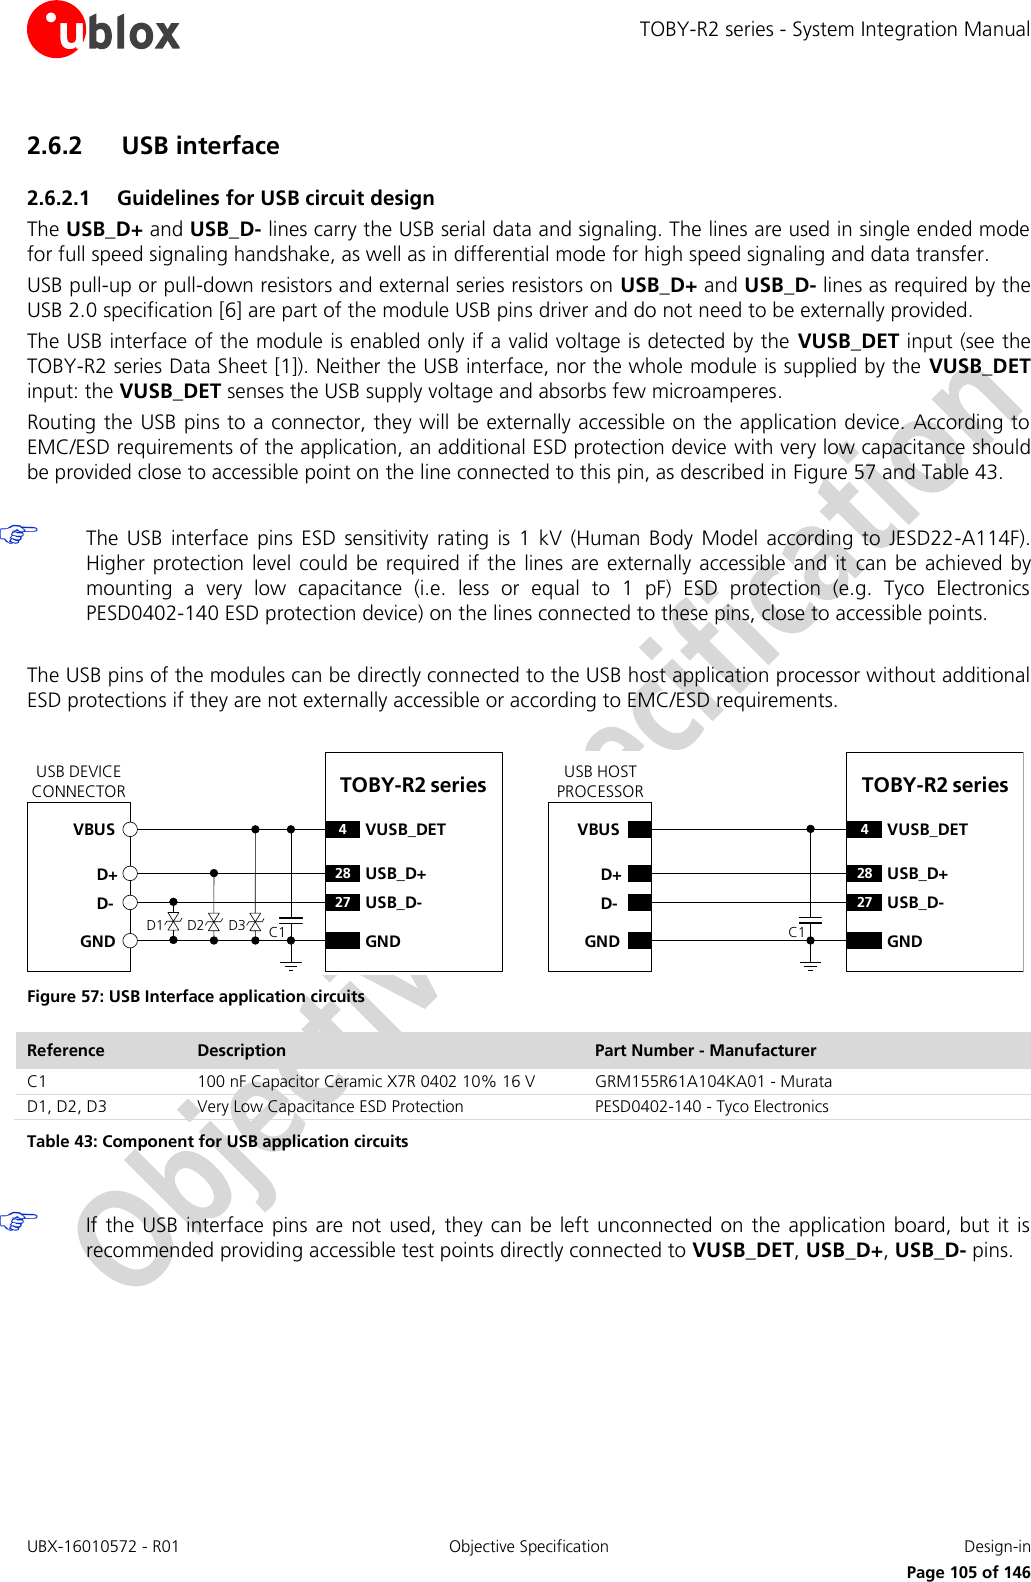 TOBY-R2 series - System Integration Manual UBX-16010572 - R01  Objective Specification  Design-in     Page 105 of 146 2.6.2 USB interface 2.6.2.1 Guidelines for USB circuit design The USB_D+ and USB_D- lines carry the USB serial data and signaling. The lines are used in single ended mode for full speed signaling handshake, as well as in differential mode for high speed signaling and data transfer. USB pull-up or pull-down resistors and external series resistors on USB_D+ and USB_D- lines as required by the USB 2.0 specification [6] are part of the module USB pins driver and do not need to be externally provided. The USB interface of the module is enabled only if a valid voltage is detected by the  VUSB_DET input (see the TOBY-R2 series Data Sheet [1]). Neither the USB interface, nor the whole module is supplied by the VUSB_DET input: the VUSB_DET senses the USB supply voltage and absorbs few microamperes. Routing the USB pins to a connector, they will be externally accessible on the application device. According to EMC/ESD requirements of the application, an additional ESD protection device with very low capacitance should be provided close to accessible point on the line connected to this pin, as described in Figure 57 and Table 43.   The  USB interface  pins  ESD  sensitivity  rating  is  1  kV  (Human  Body  Model  according  to  JESD22-A114F). Higher protection level could  be  required if the lines are externally accessible and it can be achieved by mounting  a  very  low  capacitance  (i.e.  less  or  equal  to  1  pF)  ESD  protection  (e.g.  Tyco  Electronics PESD0402-140 ESD protection device) on the lines connected to these pins, close to accessible points.  The USB pins of the modules can be directly connected to the USB host application processor without additional ESD protections if they are not externally accessible or according to EMC/ESD requirements.  D+D-GND28 USB_D+27 USB_D-GNDUSB DEVICE CONNECTORVBUSD+D-GND28 USB_D+27 USB_D-GNDUSB HOST PROCESSORTOBY-R2 series  TOBY-R2 series VBUS 4VUSB_DET4VUSB_DETD1 D2 D3 C1 C1 Figure 57: USB Interface application circuits Reference Description Part Number - Manufacturer C1 100 nF Capacitor Ceramic X7R 0402 10% 16 V GRM155R61A104KA01 - Murata D1, D2, D3 Very Low Capacitance ESD Protection PESD0402-140 - Tyco Electronics  Table 43: Component for USB application circuits   If the USB interface pins are not used, they can be left unconnected on the application board, but it is recommended providing accessible test points directly connected to VUSB_DET, USB_D+, USB_D- pins.  